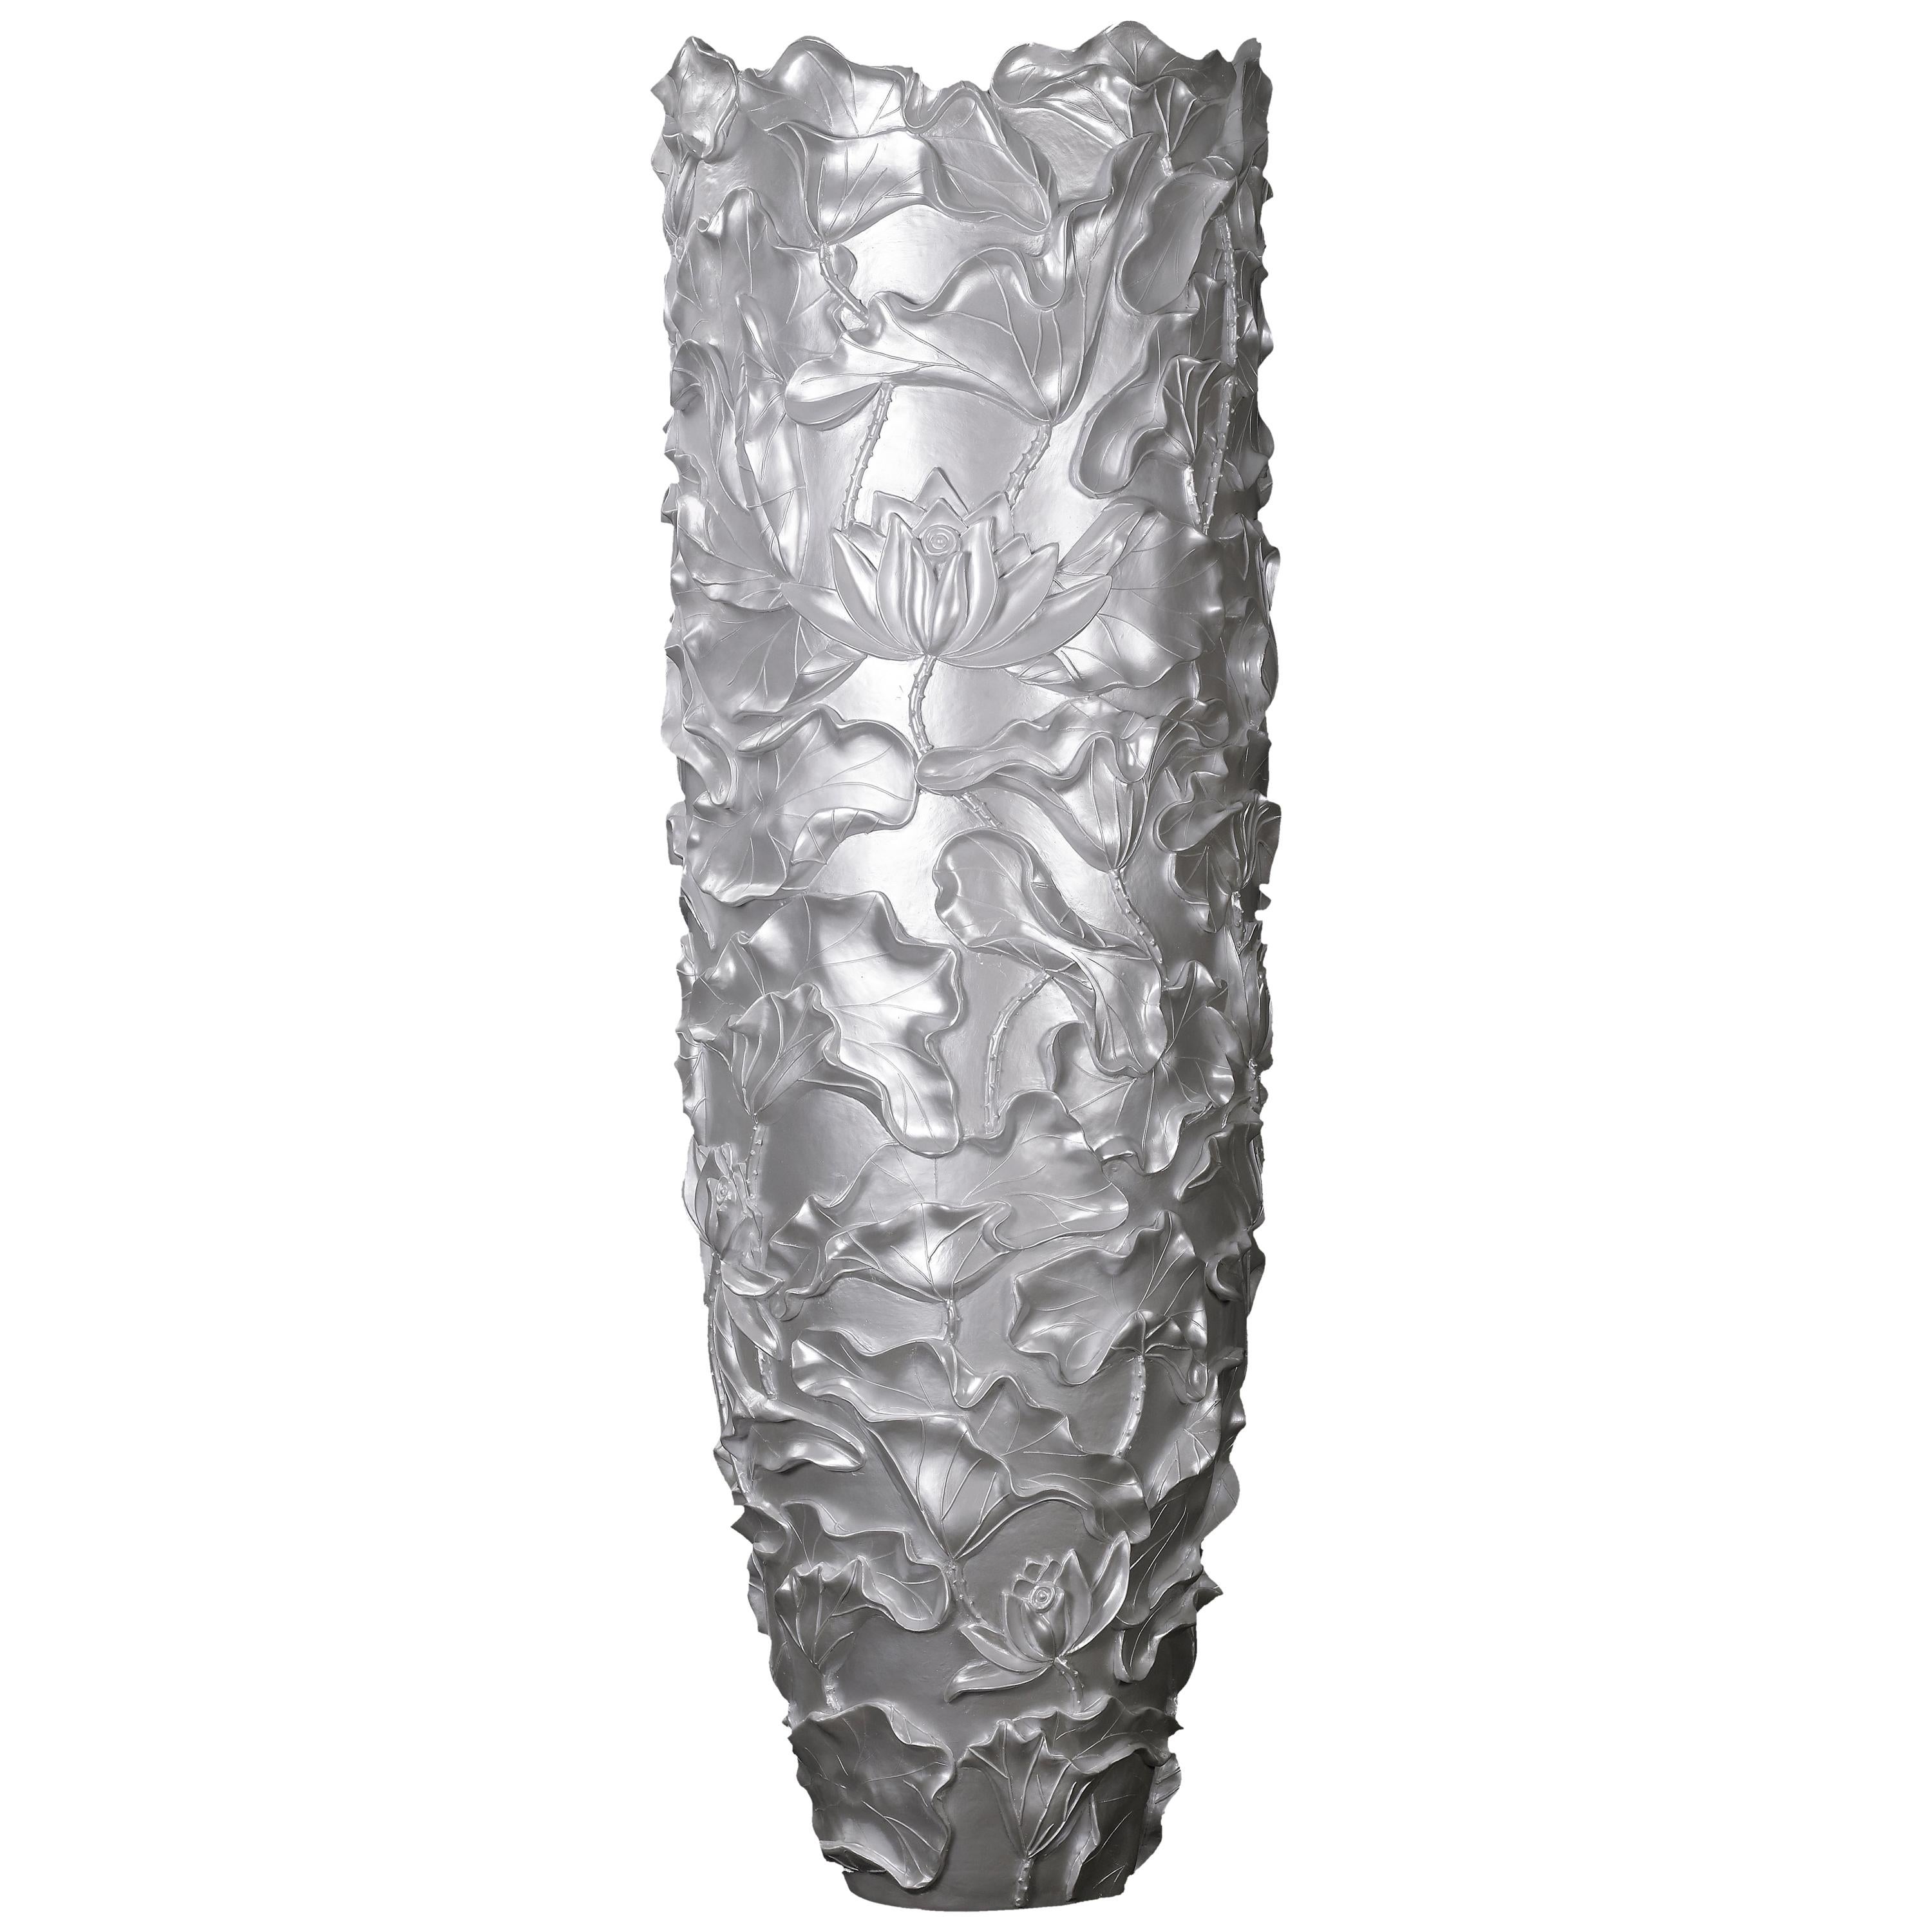 Vase Lotus Obice Big, in Resin, White Motherpearl Color, Italy For Sale